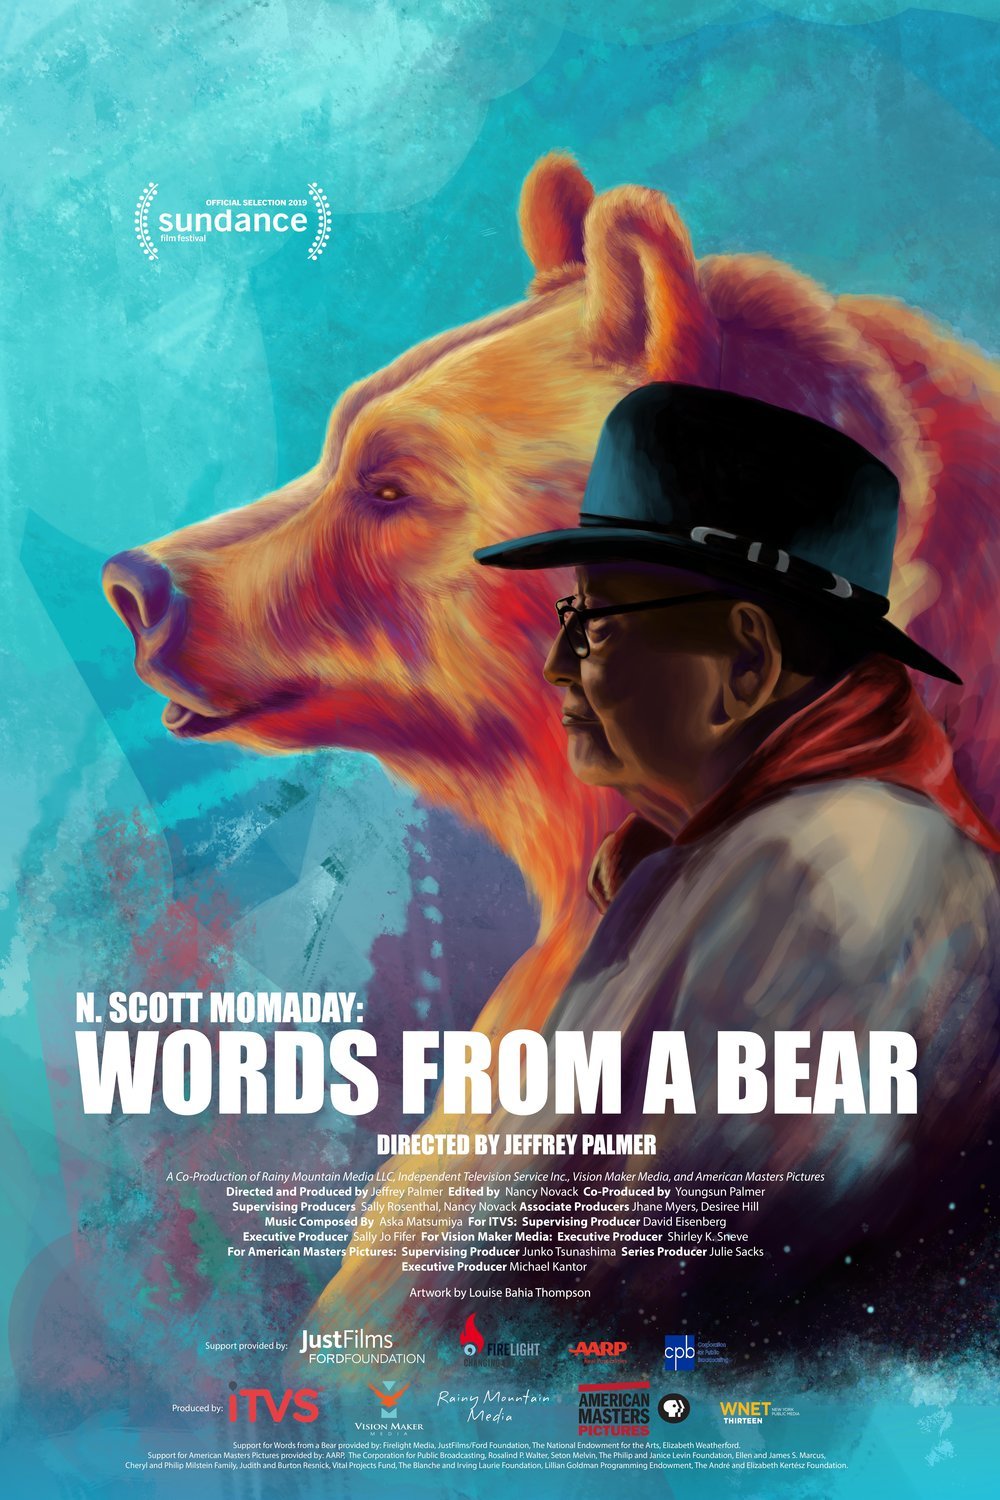 Poster of the movie N. Scott Momaday: Words from a Bear